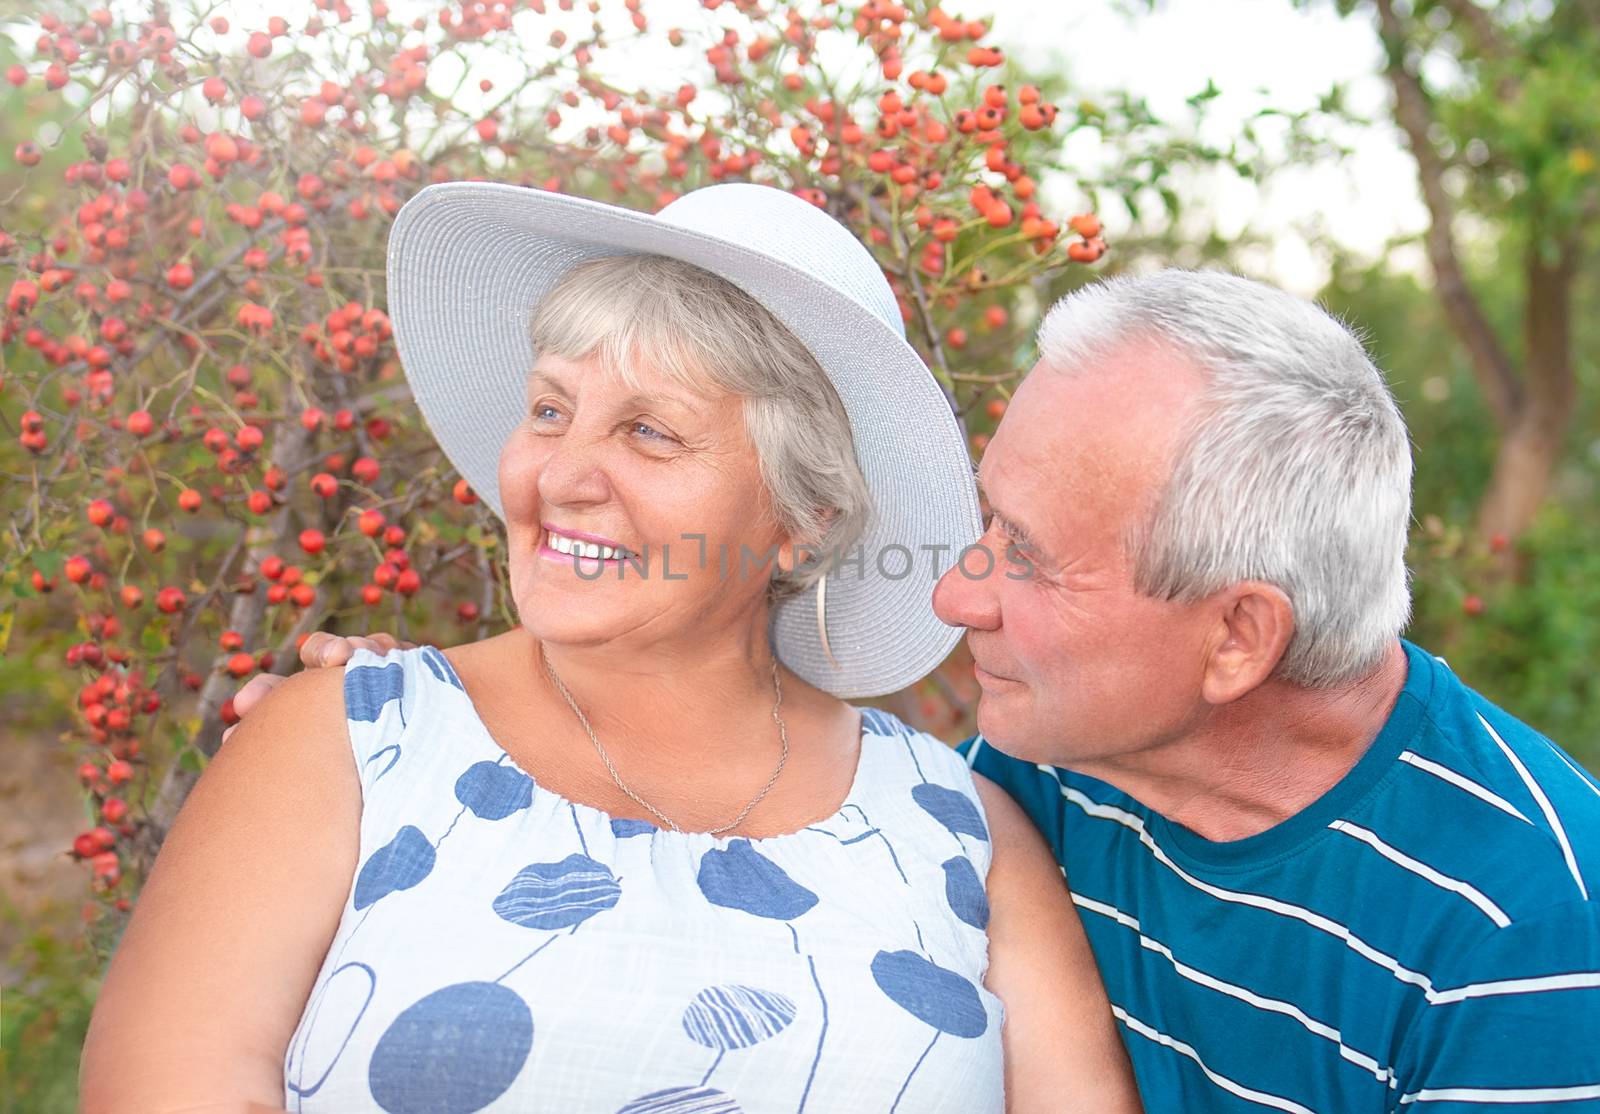 Authentic outdoor shot of aging couple having fun in the garden and blessed with love. During their game man is trying to kiss his wife and she is laughing out loud. Love and family concept. by Nickstock